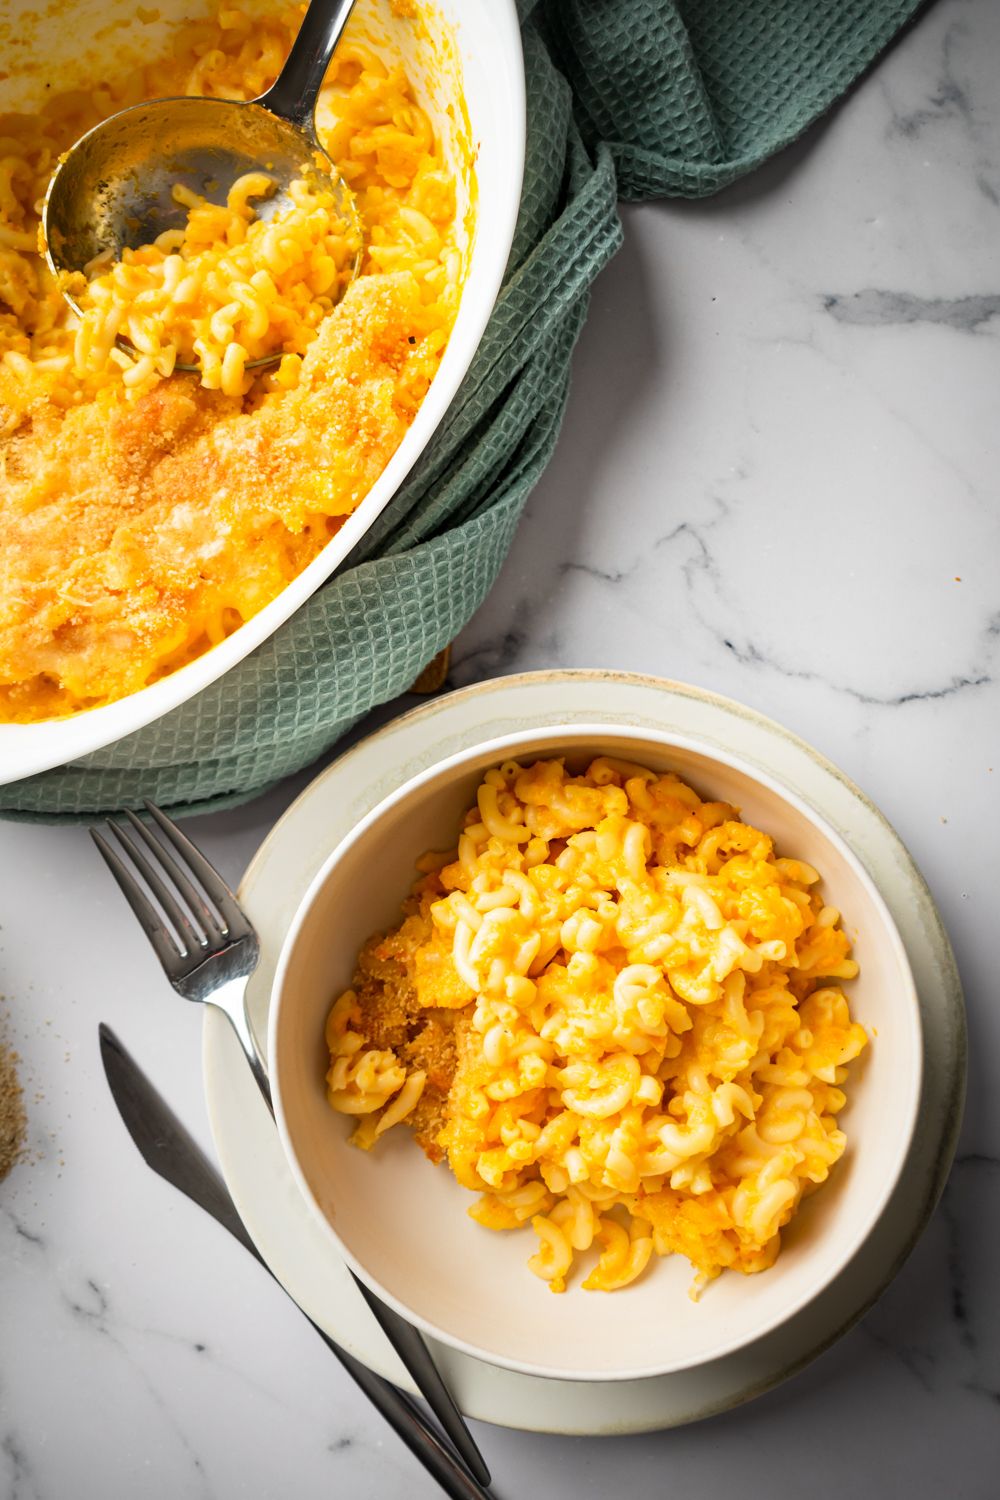 Cheddar macaroni and cheese with a creamy carrot and cheddar sauce in a bowl and in a baking dish.